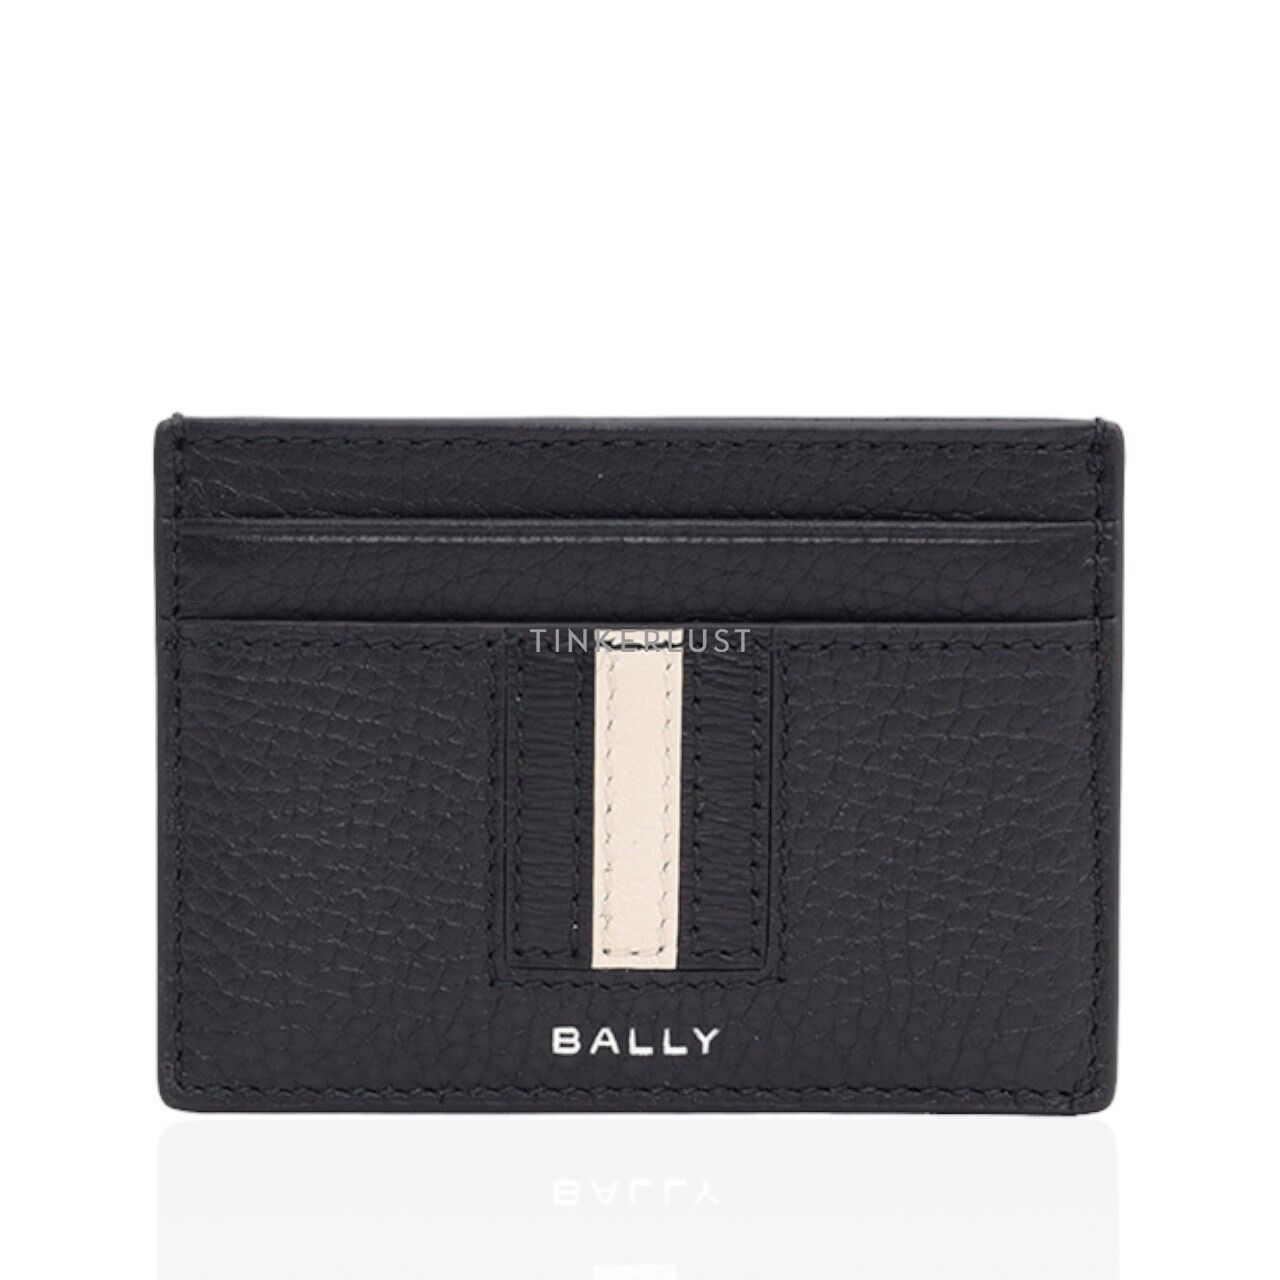 Bally Ribbon Card Holder in Black Grained Leather Wallet